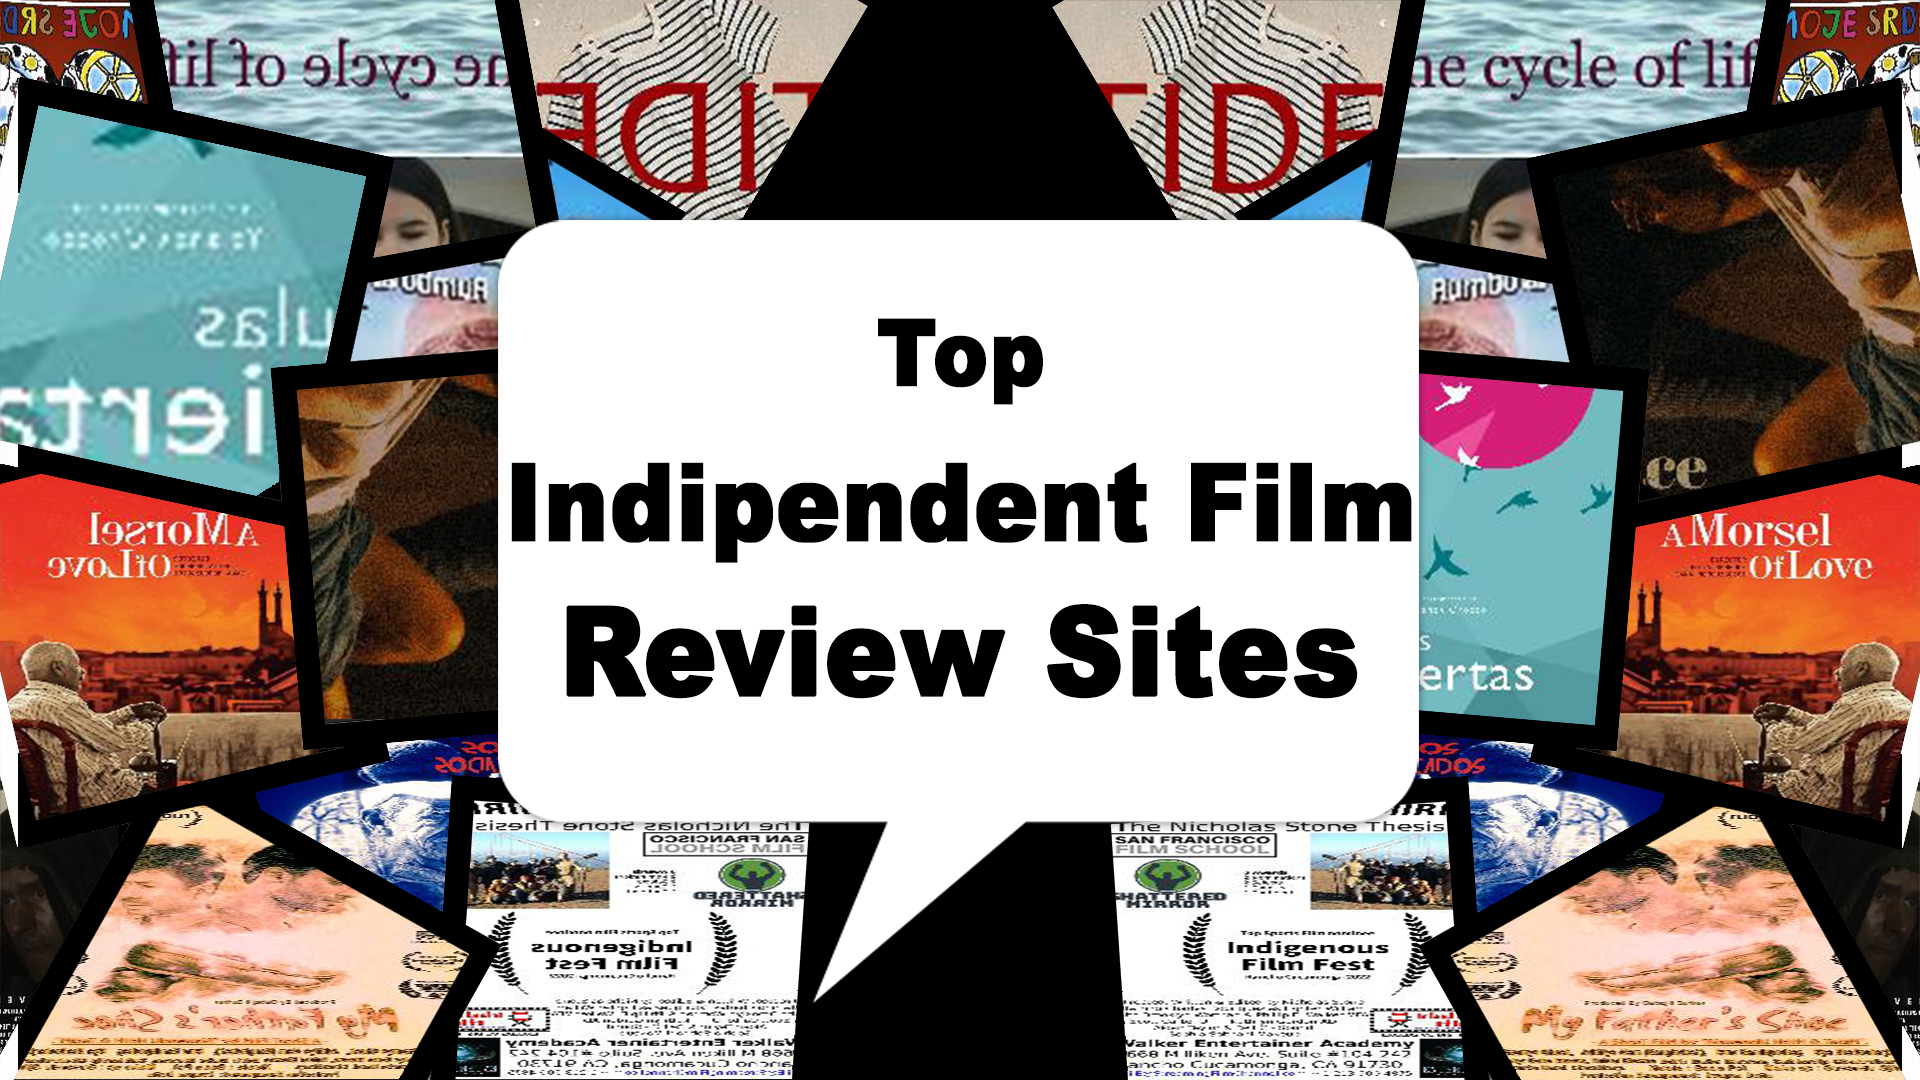 Top Independent Film Review Sites